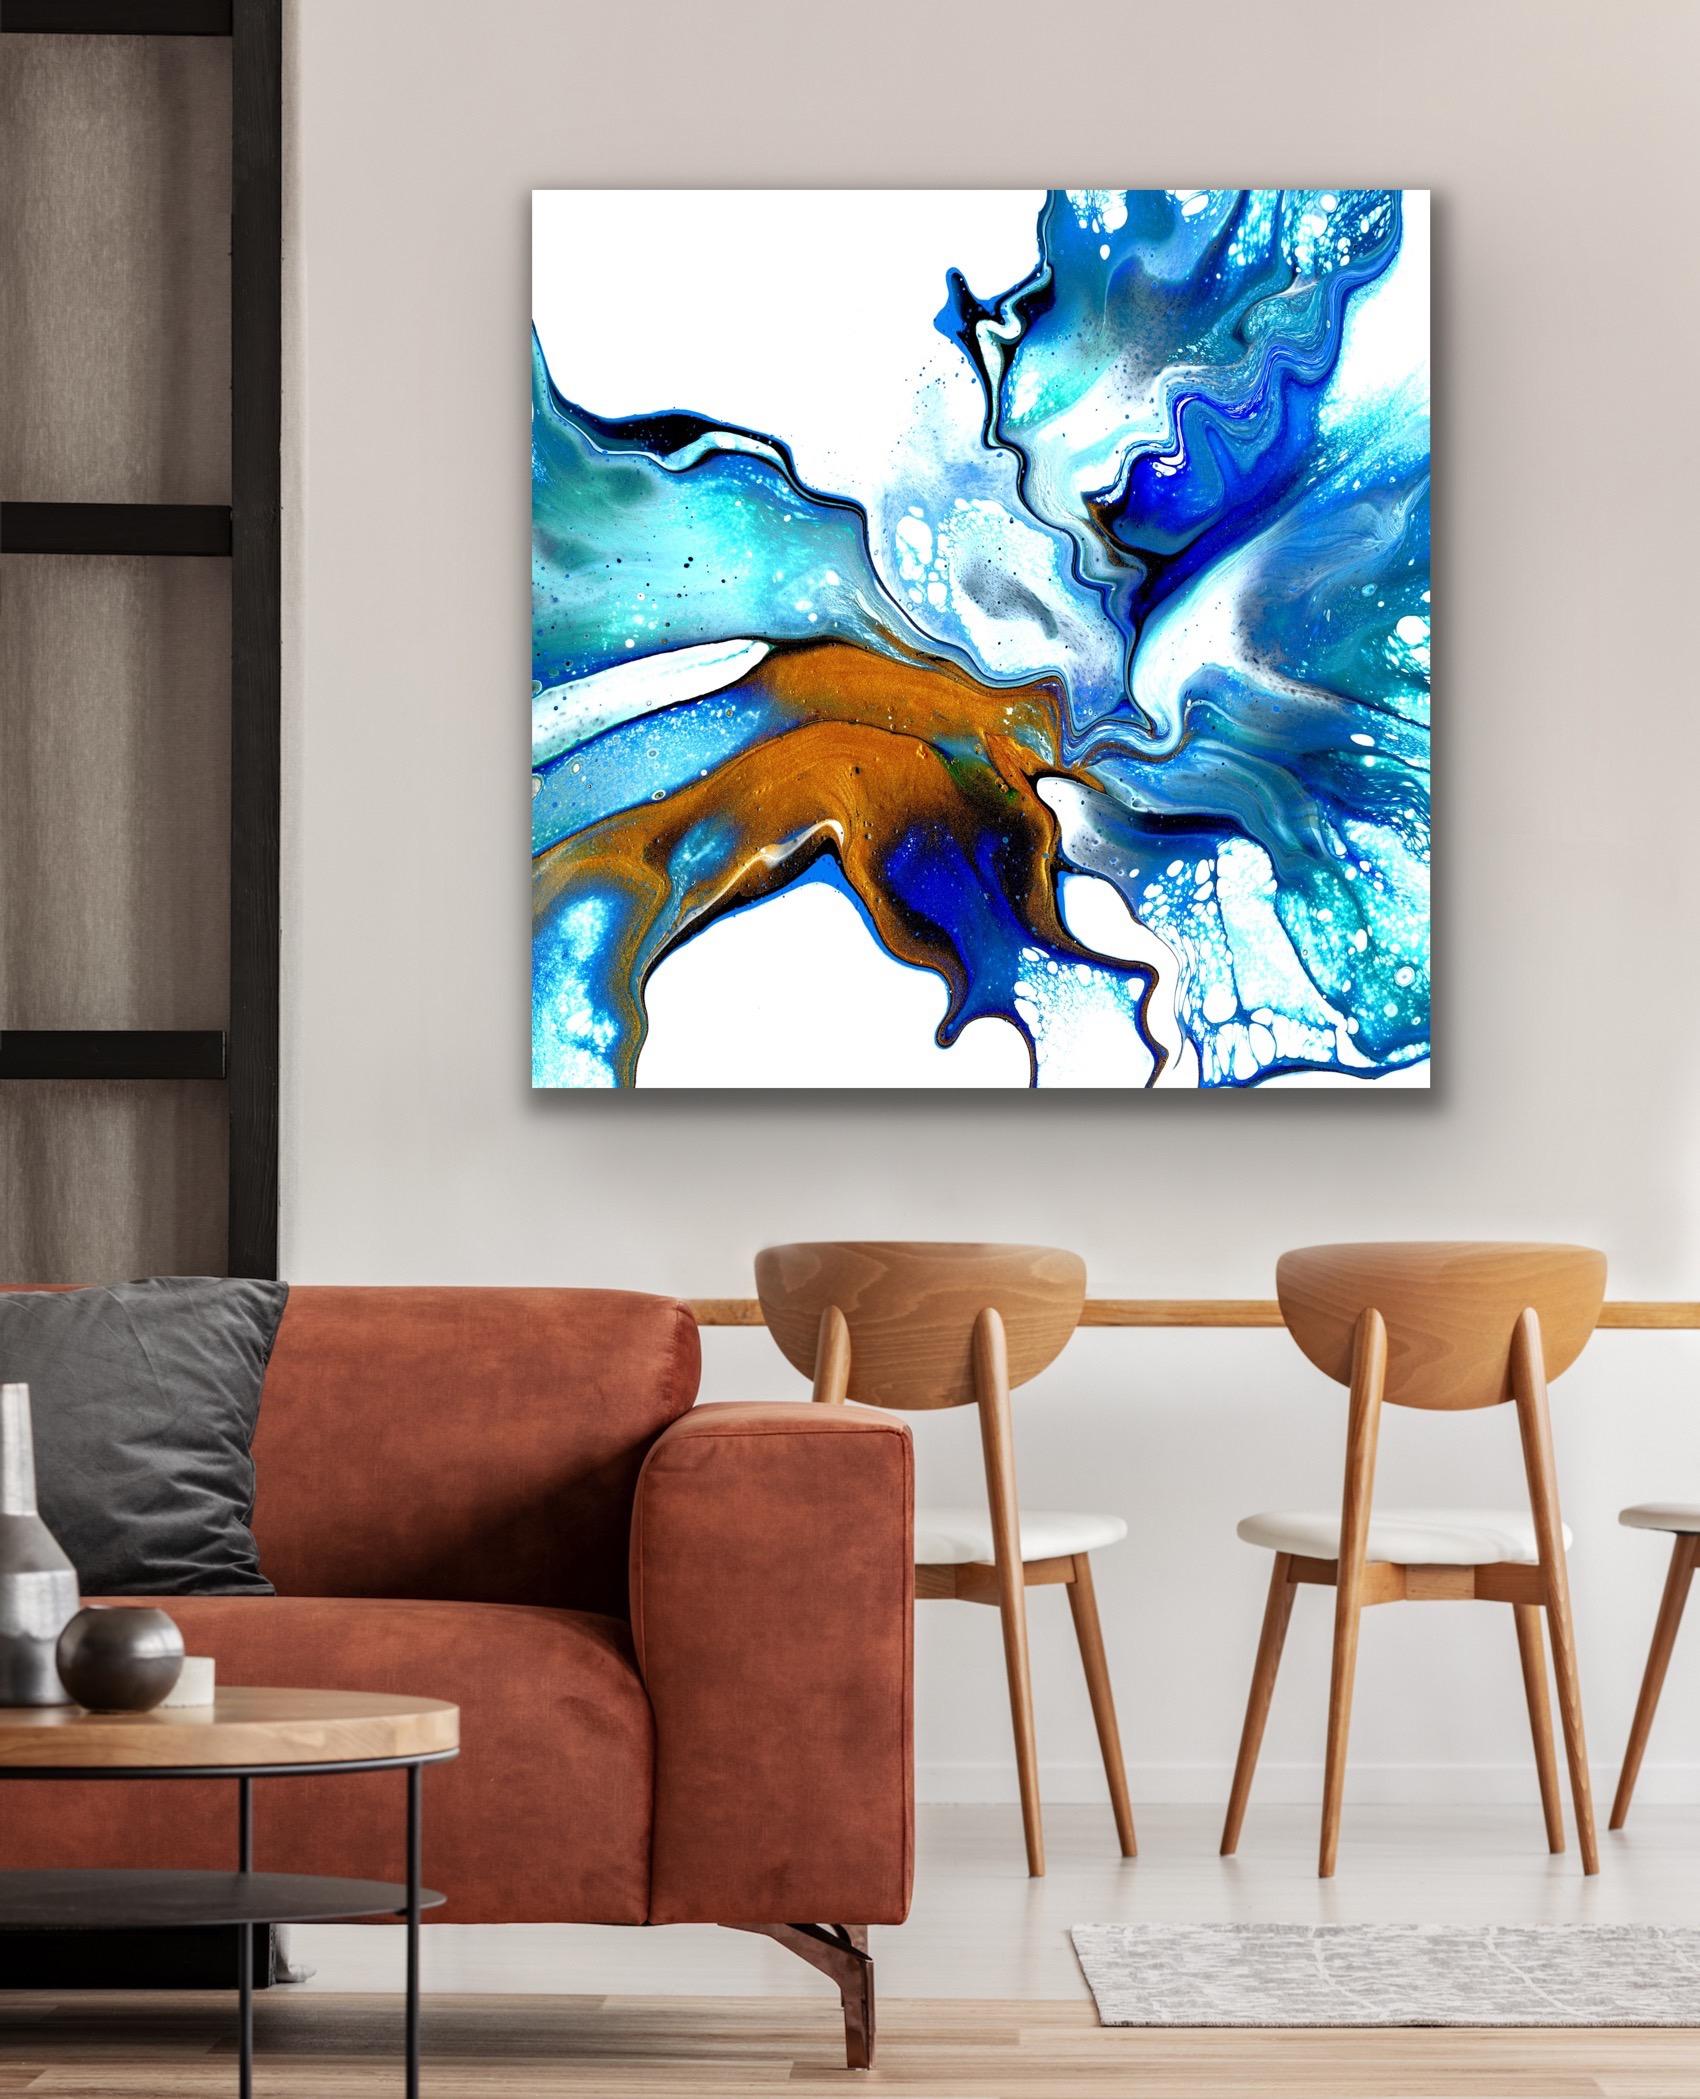 Abstract Modern Painting, Contemporary Large Giclee Print, LE Signed by Artist. 6